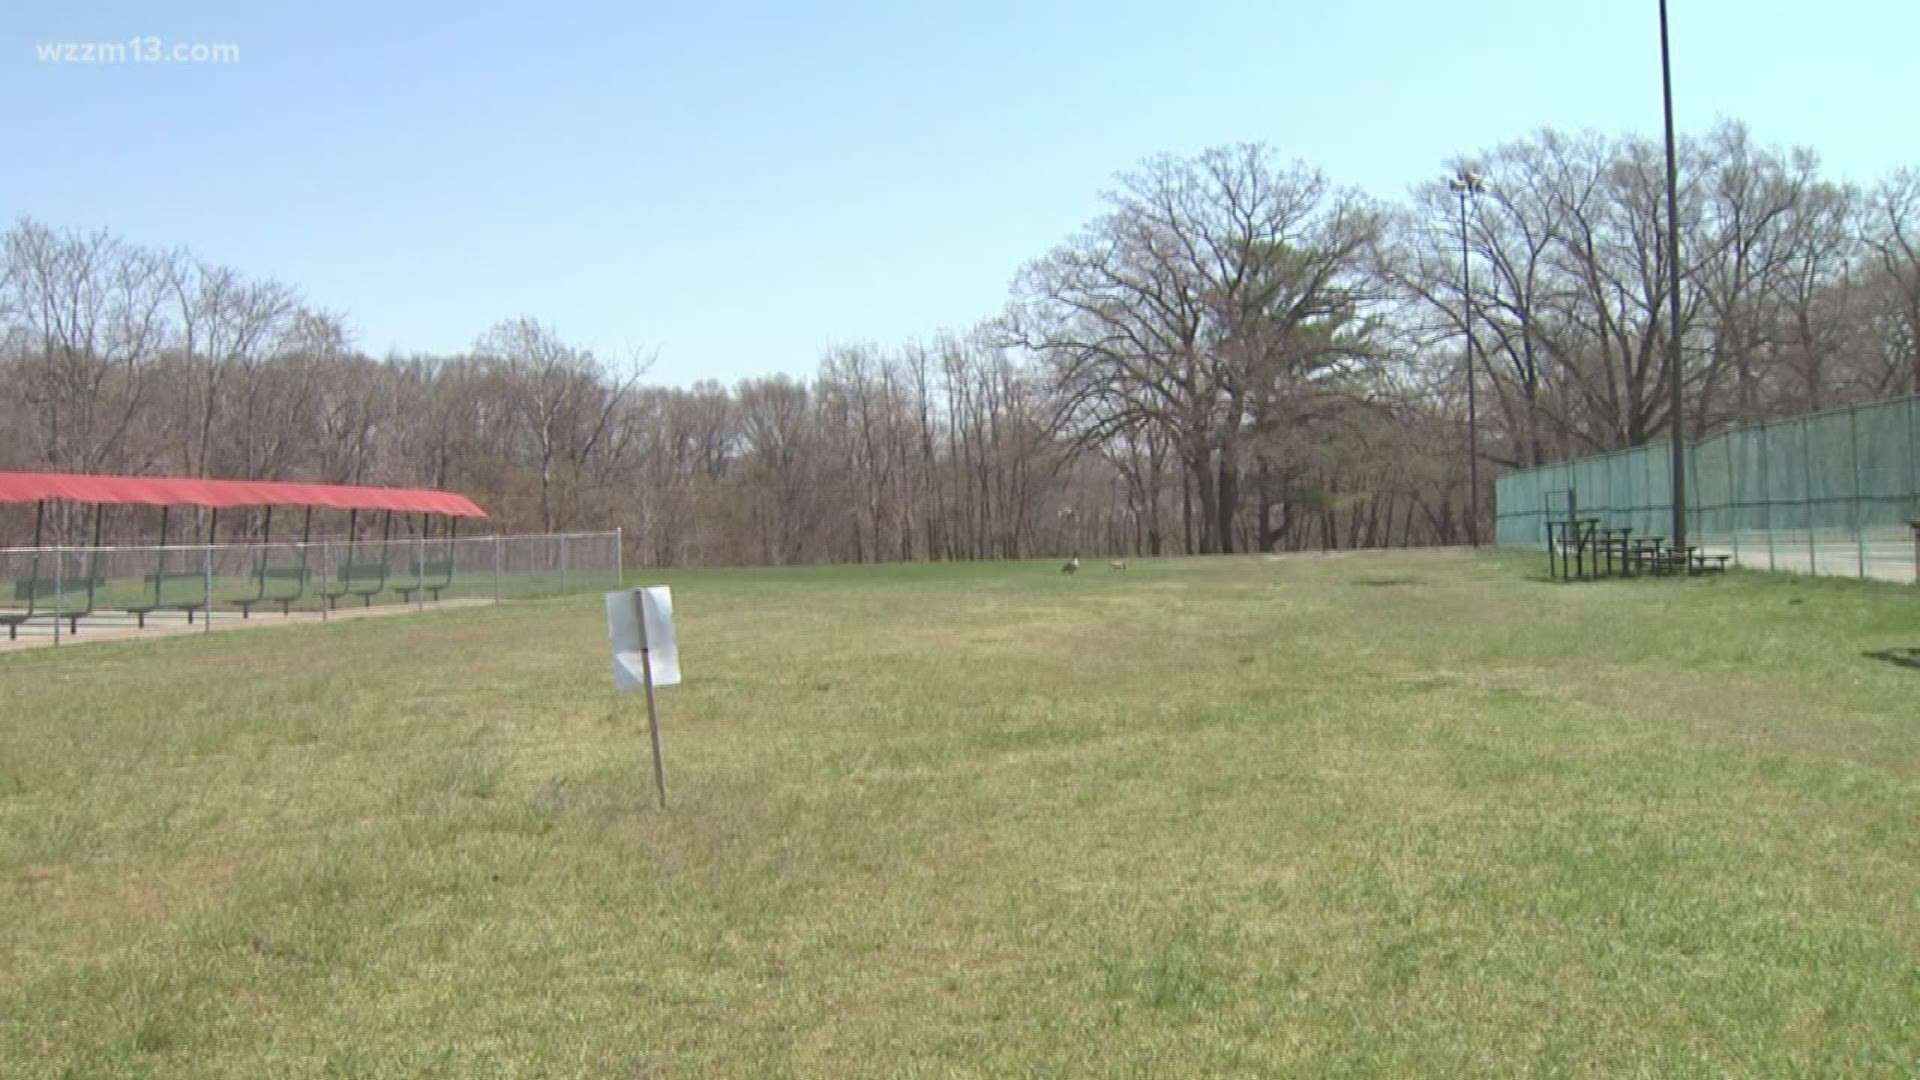 Verify: Does disc golf put trees at risk?